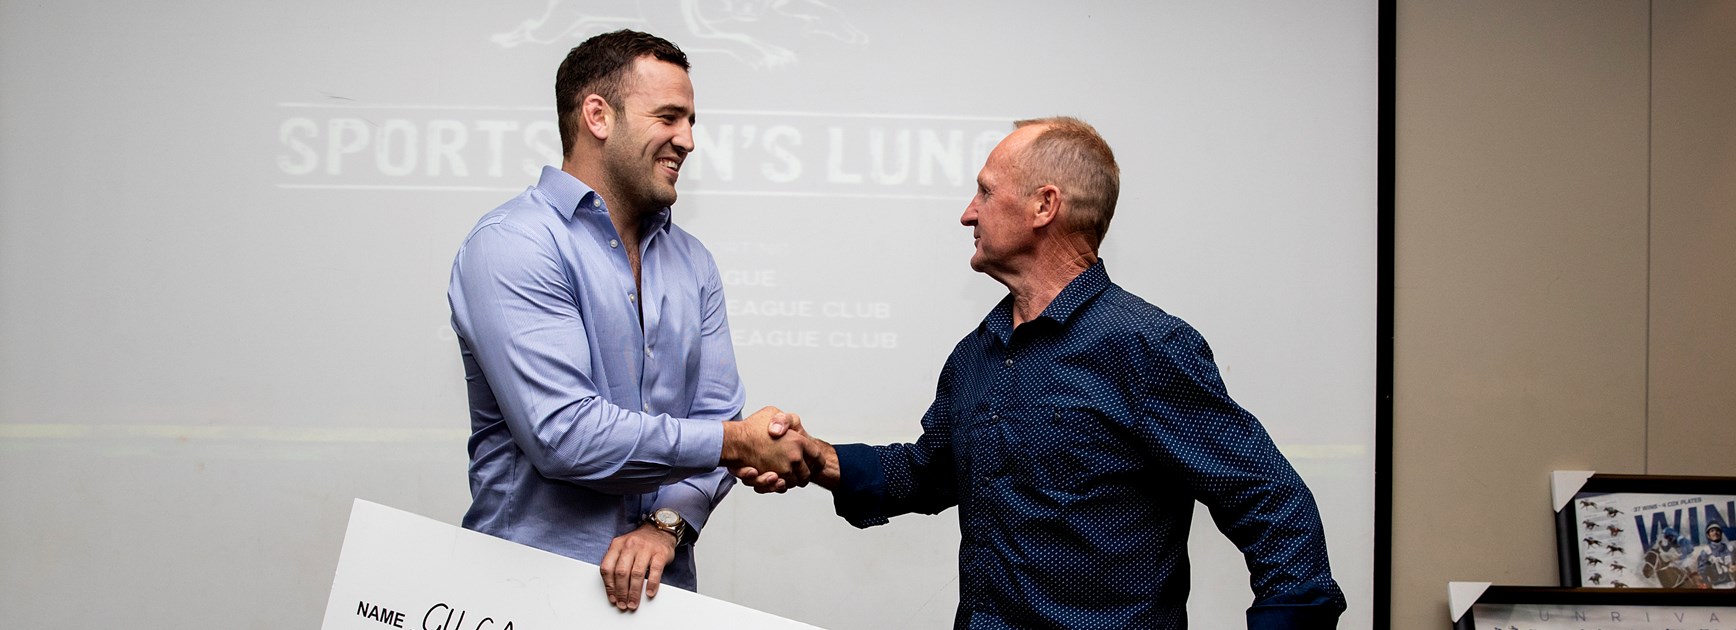 Panthers raises $40k for Rugby League community